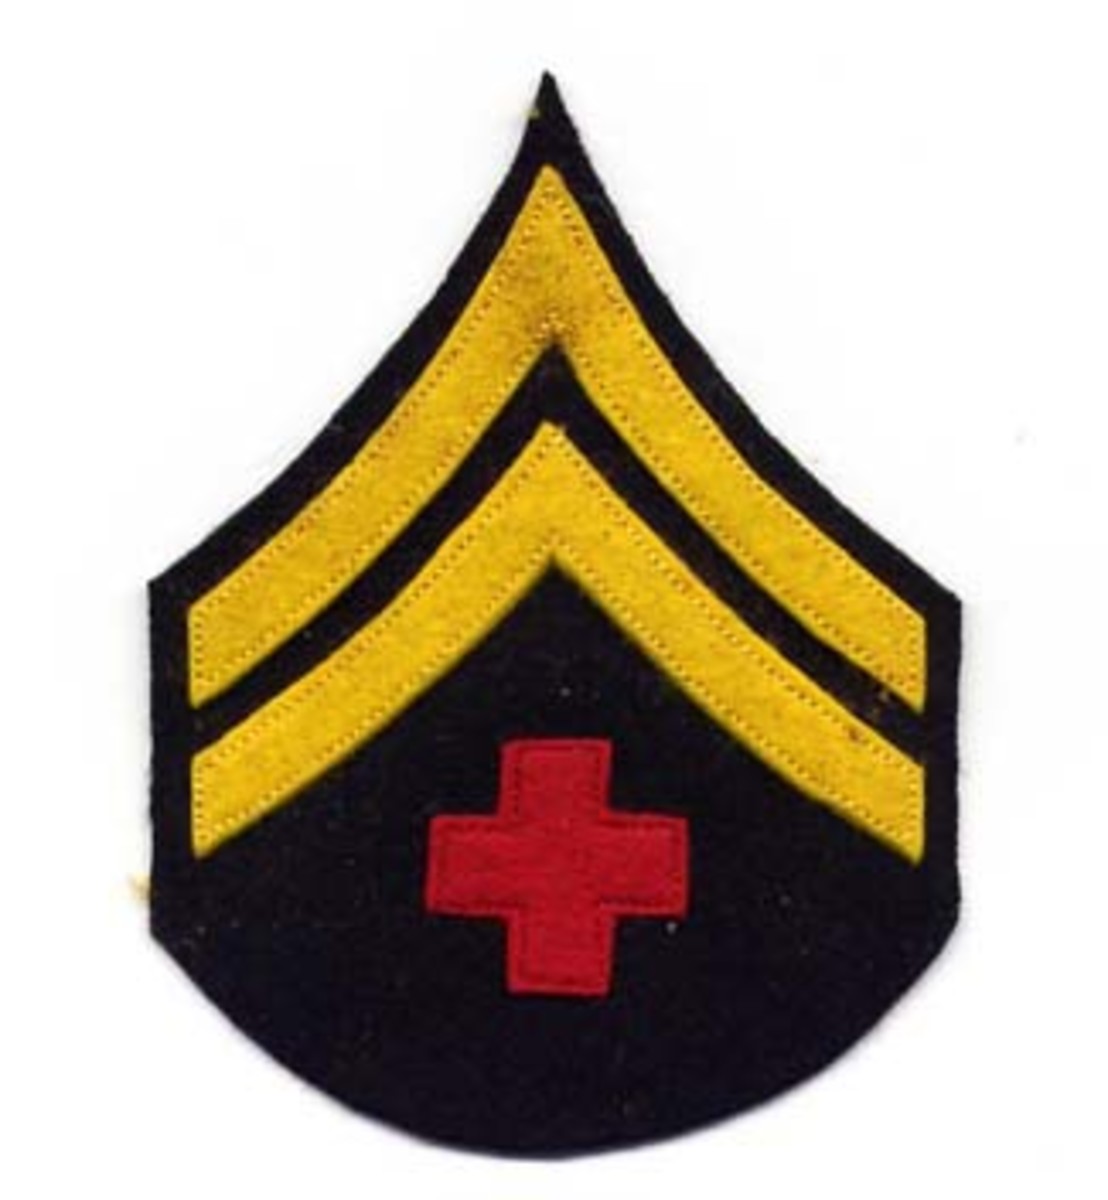 Rank/Specialty Patch (above) – Prior to 1939, one to three chevrons (various colors and weaving exist in Vs and backgrounds) were worn by Enrollees, Assistant Leader and Leader respectively. Chevrons combined with a skill logo was one type of patch commonly used.